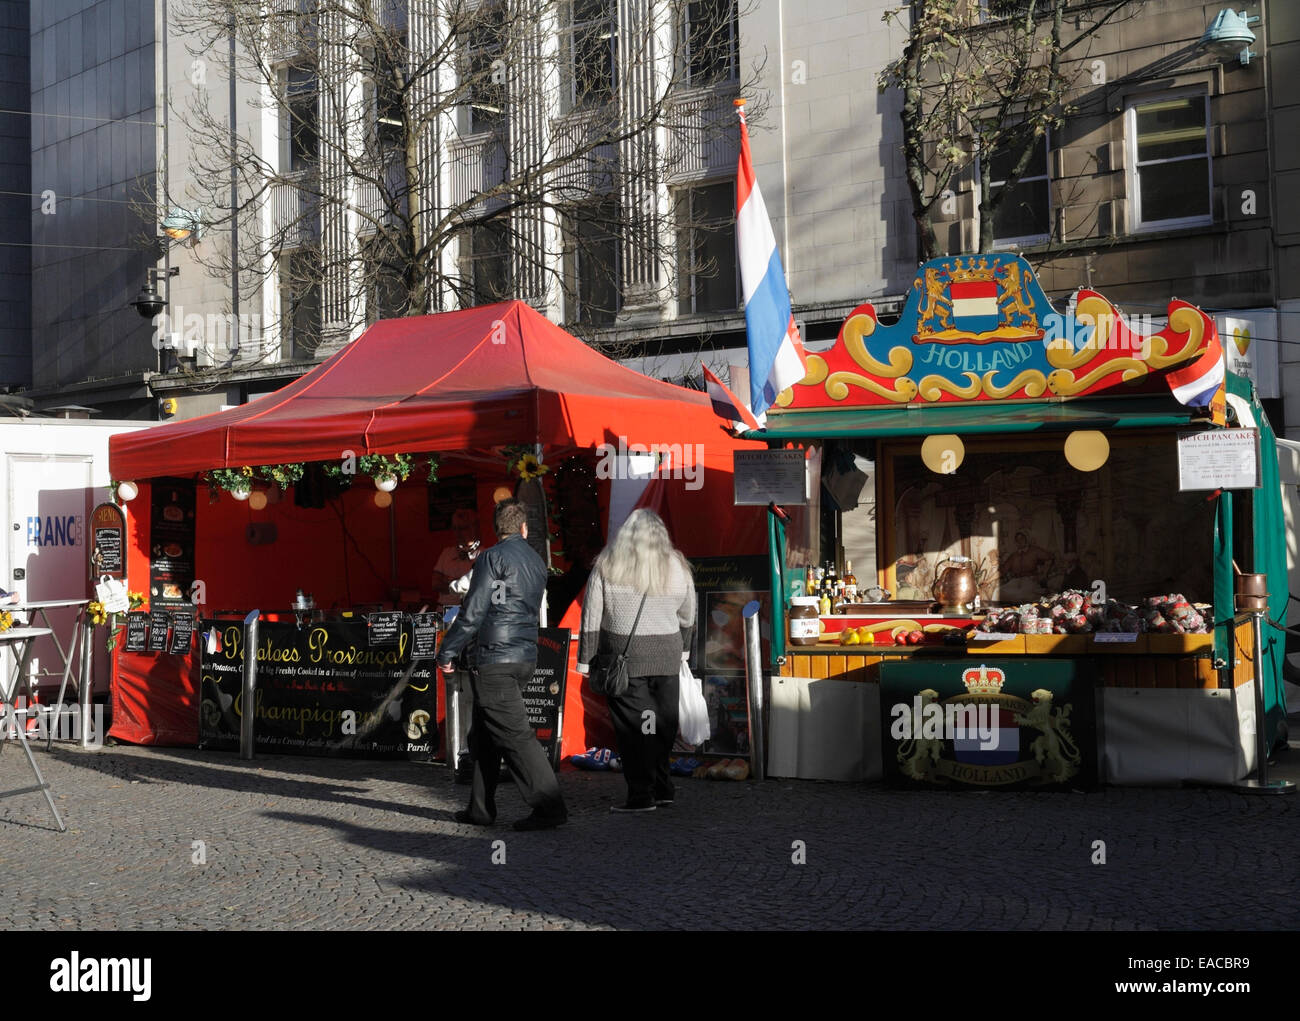 Scene from a continental food market on Fargate, Sheffield city centre. England UK Food stalls Stock Photo